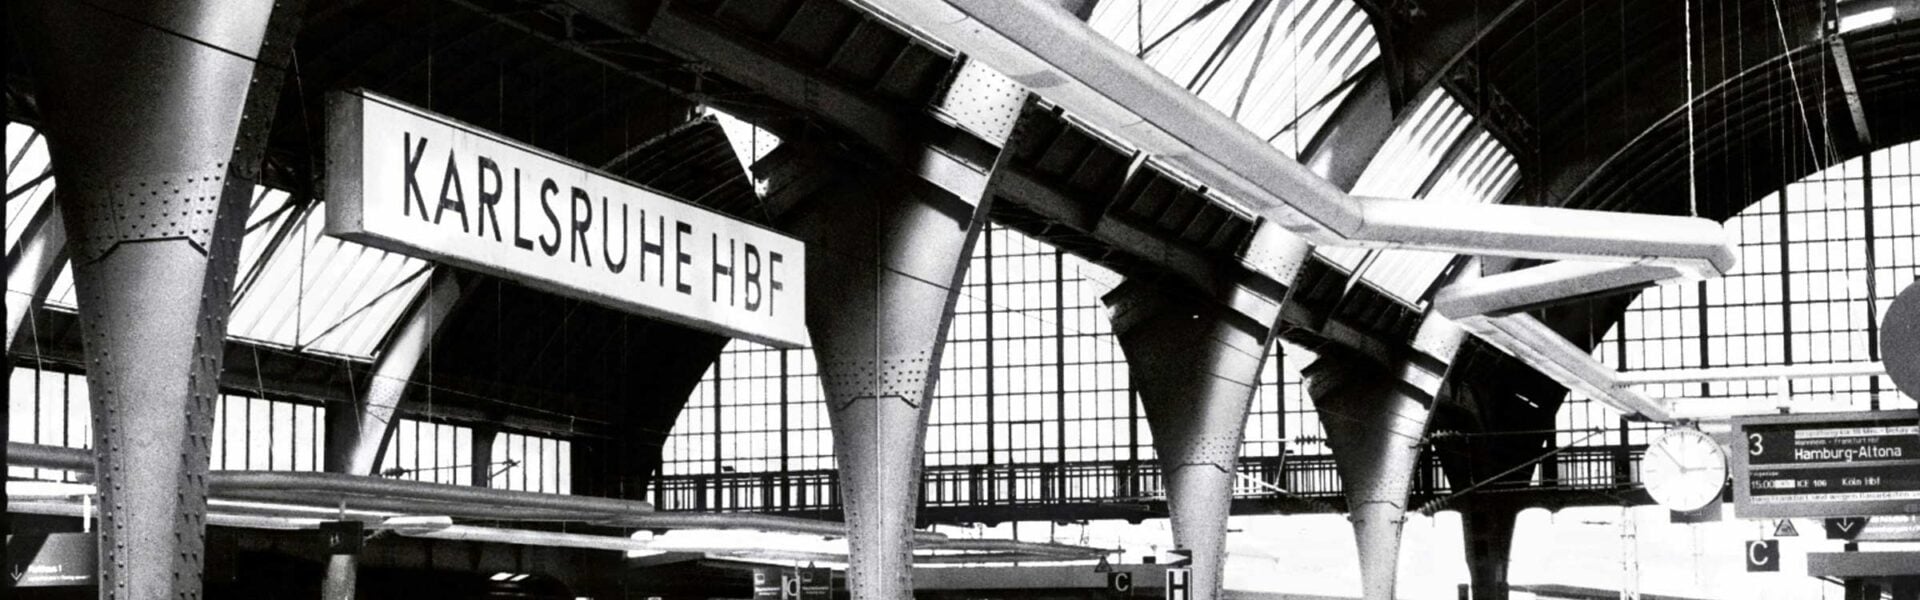 Sign that says Karlsruhe HBF in a transportation station.